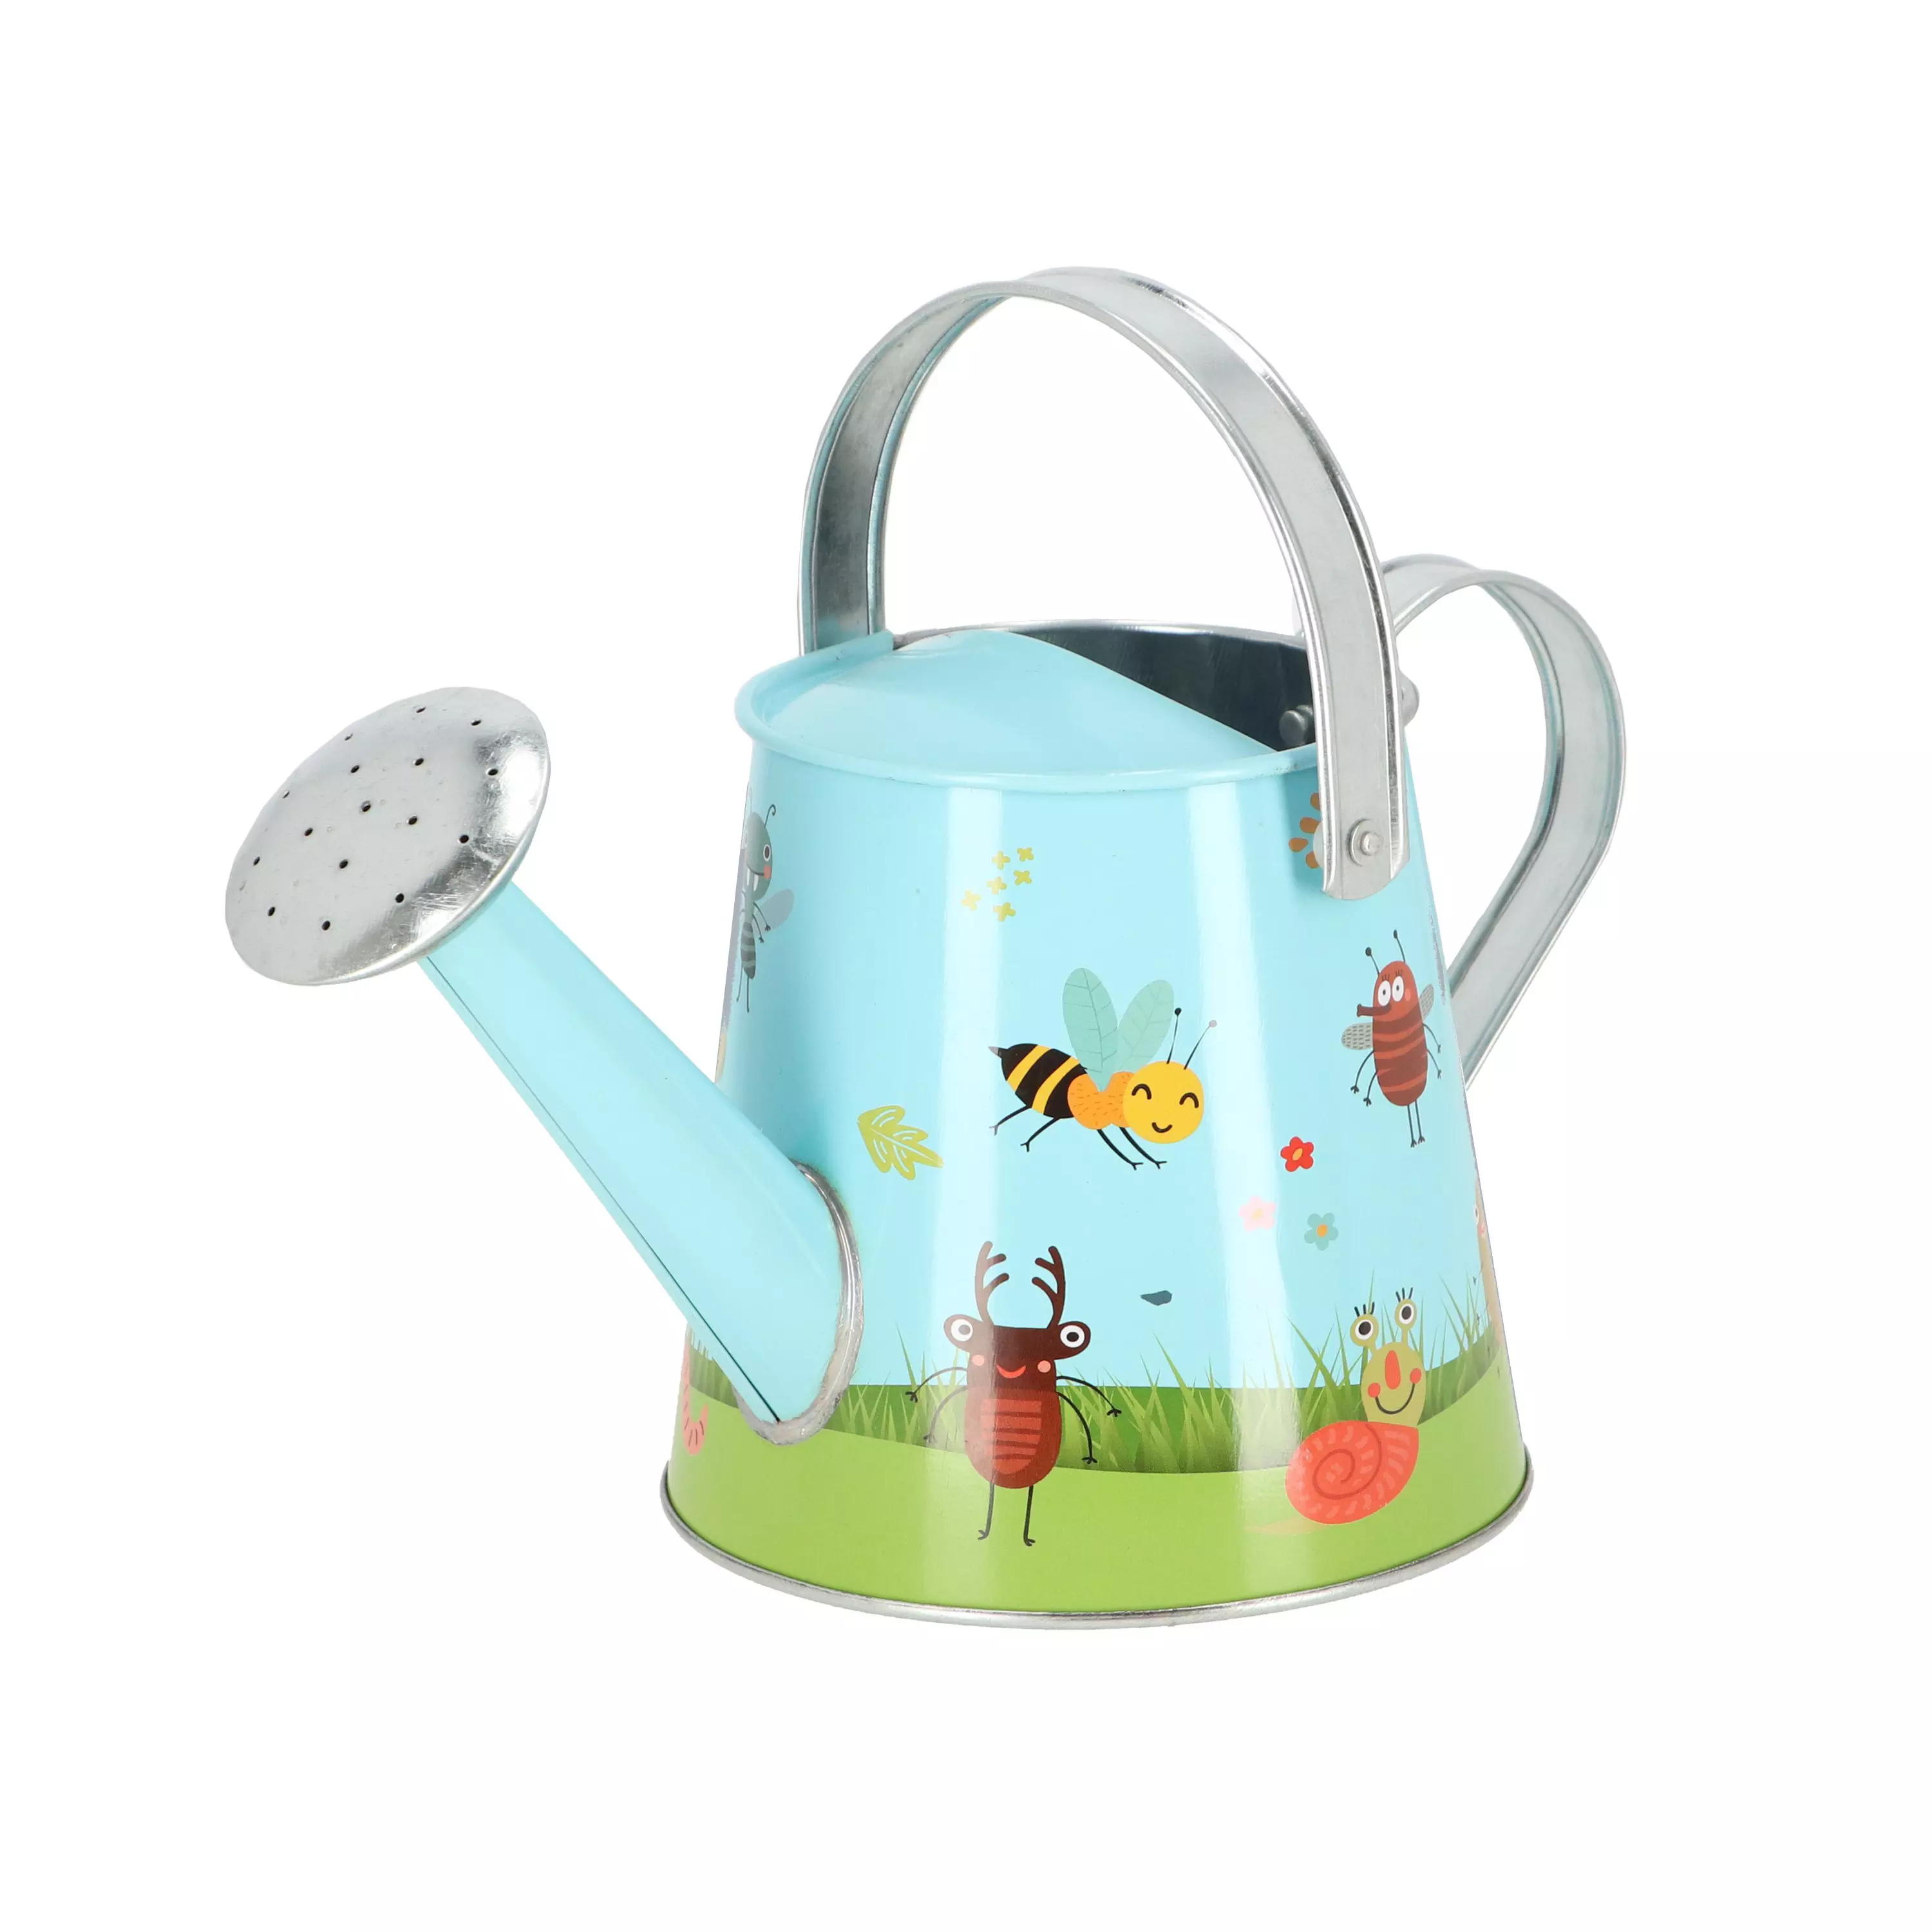 Gardenlife Childrens Watering Can Insects Kg270